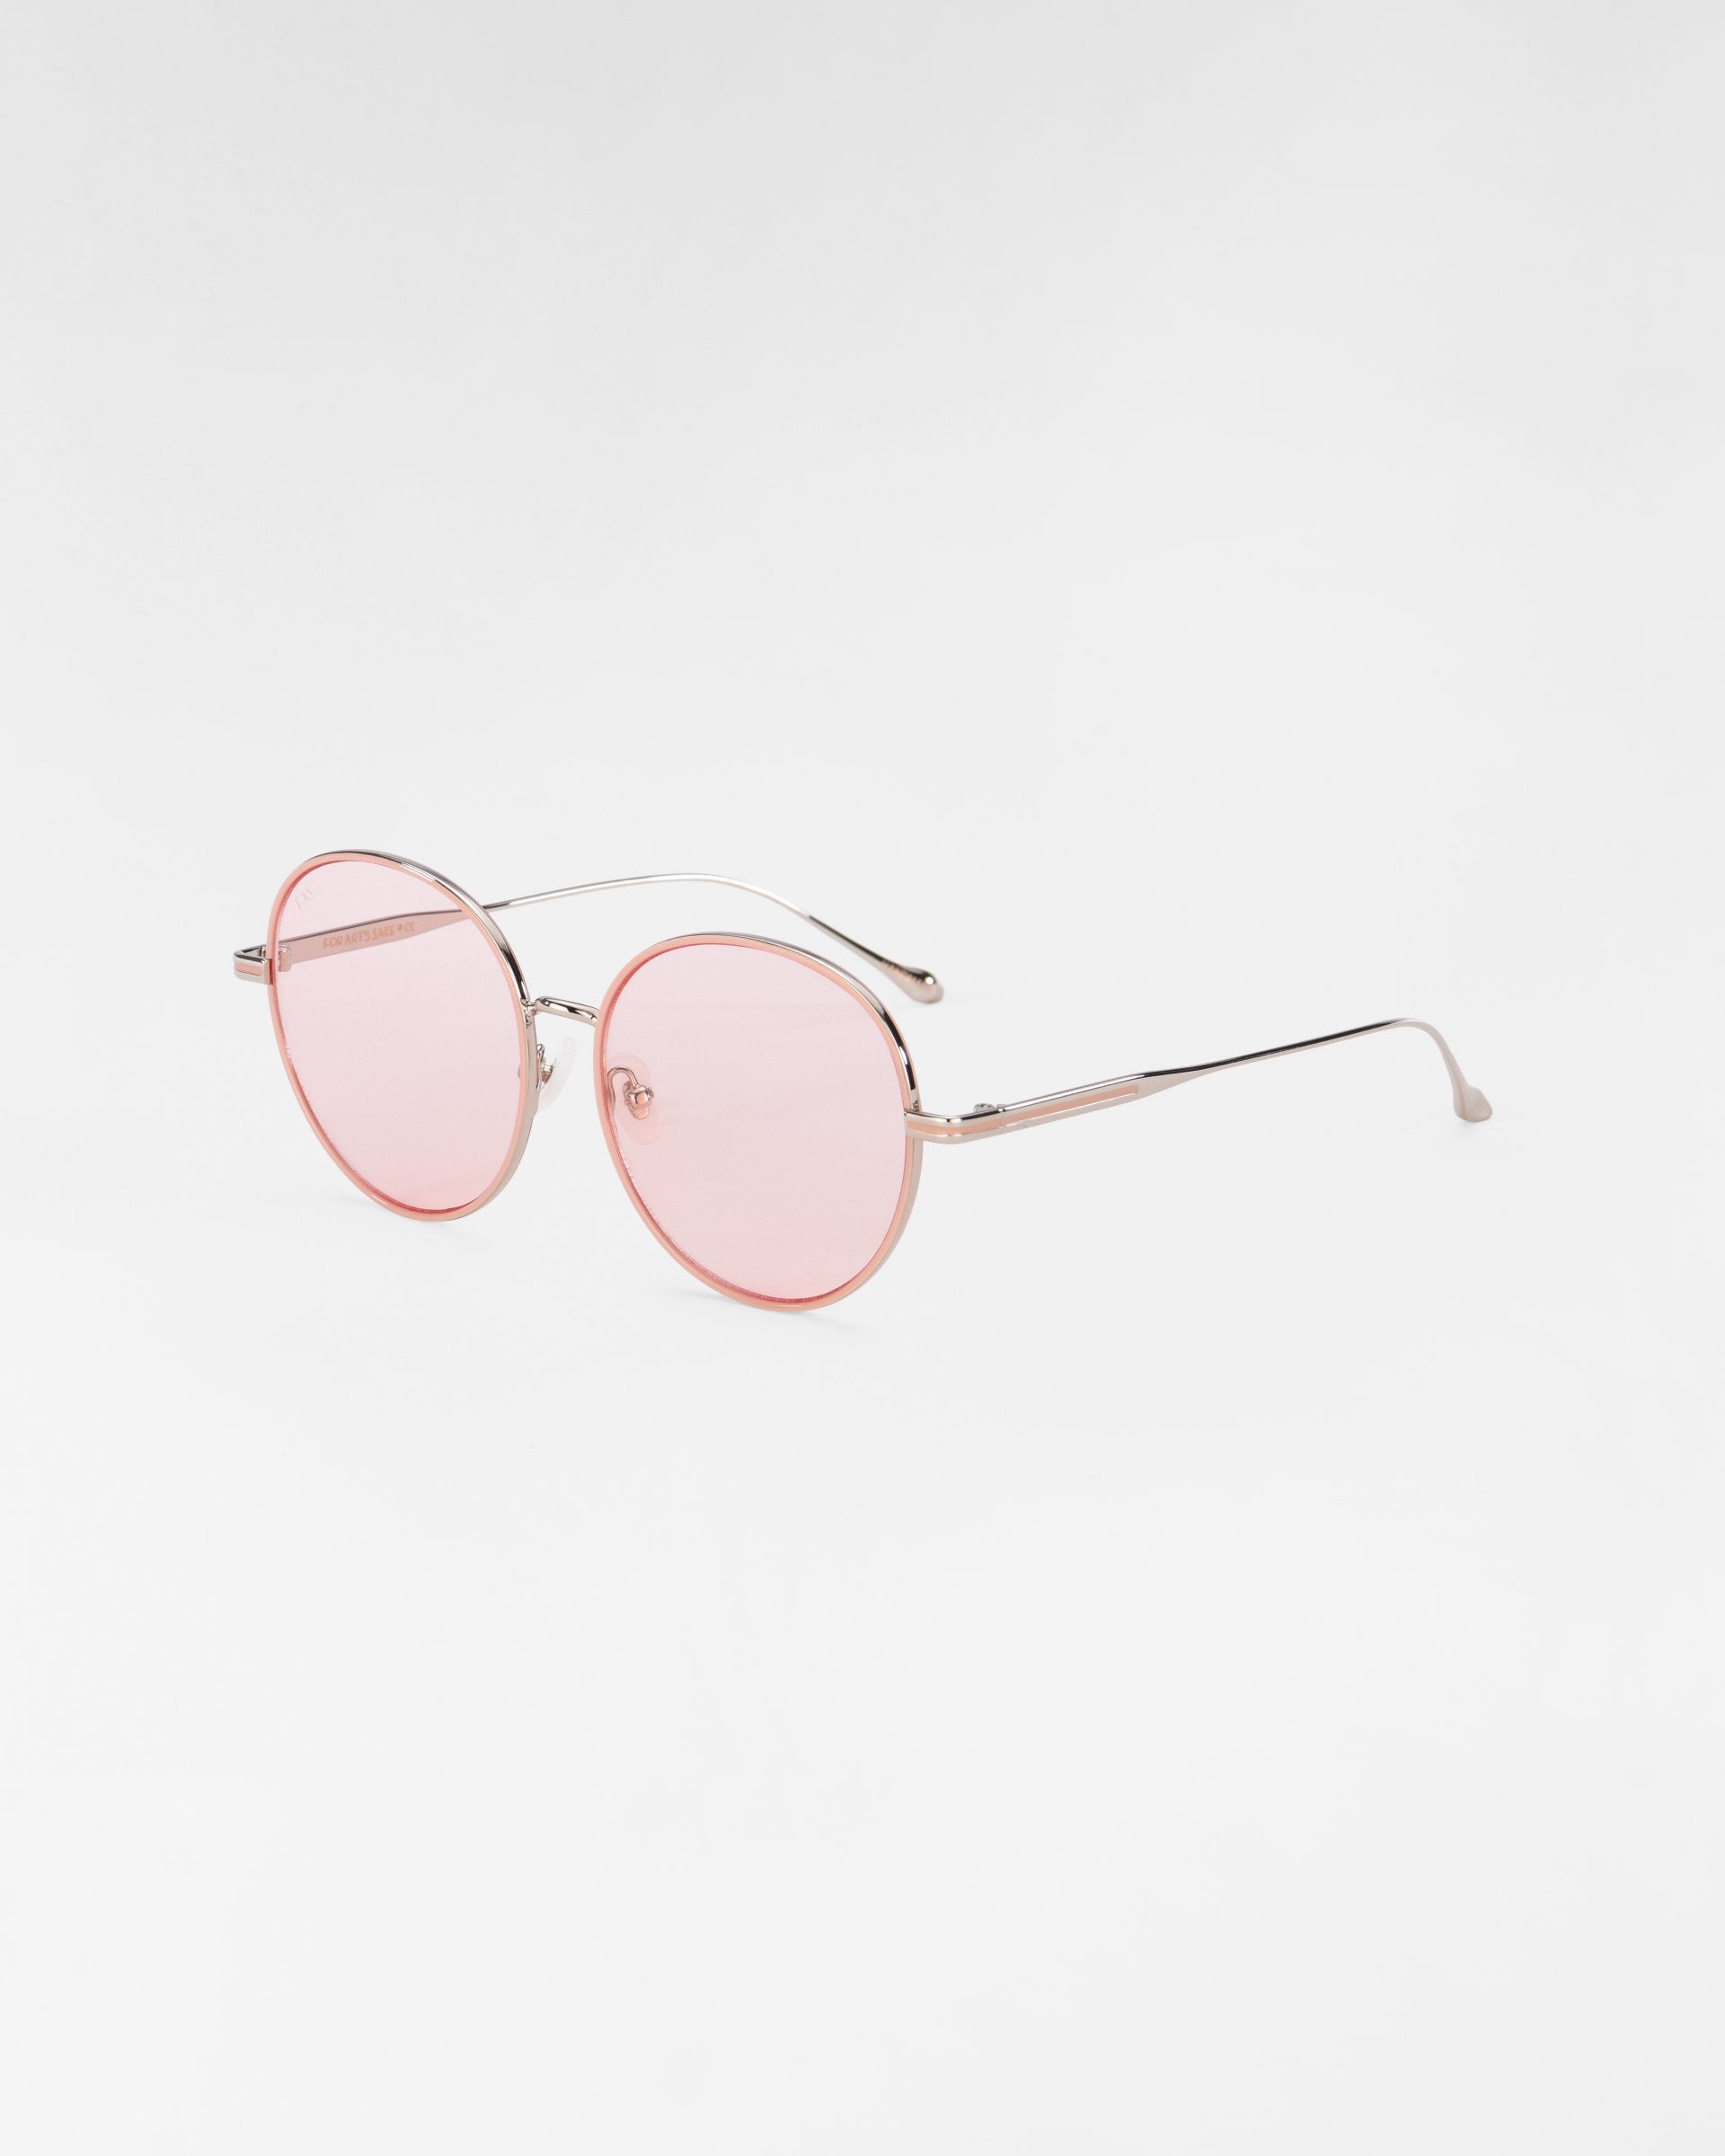 A pair of round, thin-framed For Art&#39;s Sake® Lemon sunglasses with pink-tinted lenses and metal temples. The clear nose pads are complemented by hand-painted enamel details. The frame is delicate and minimalistic, set against a plain white background.